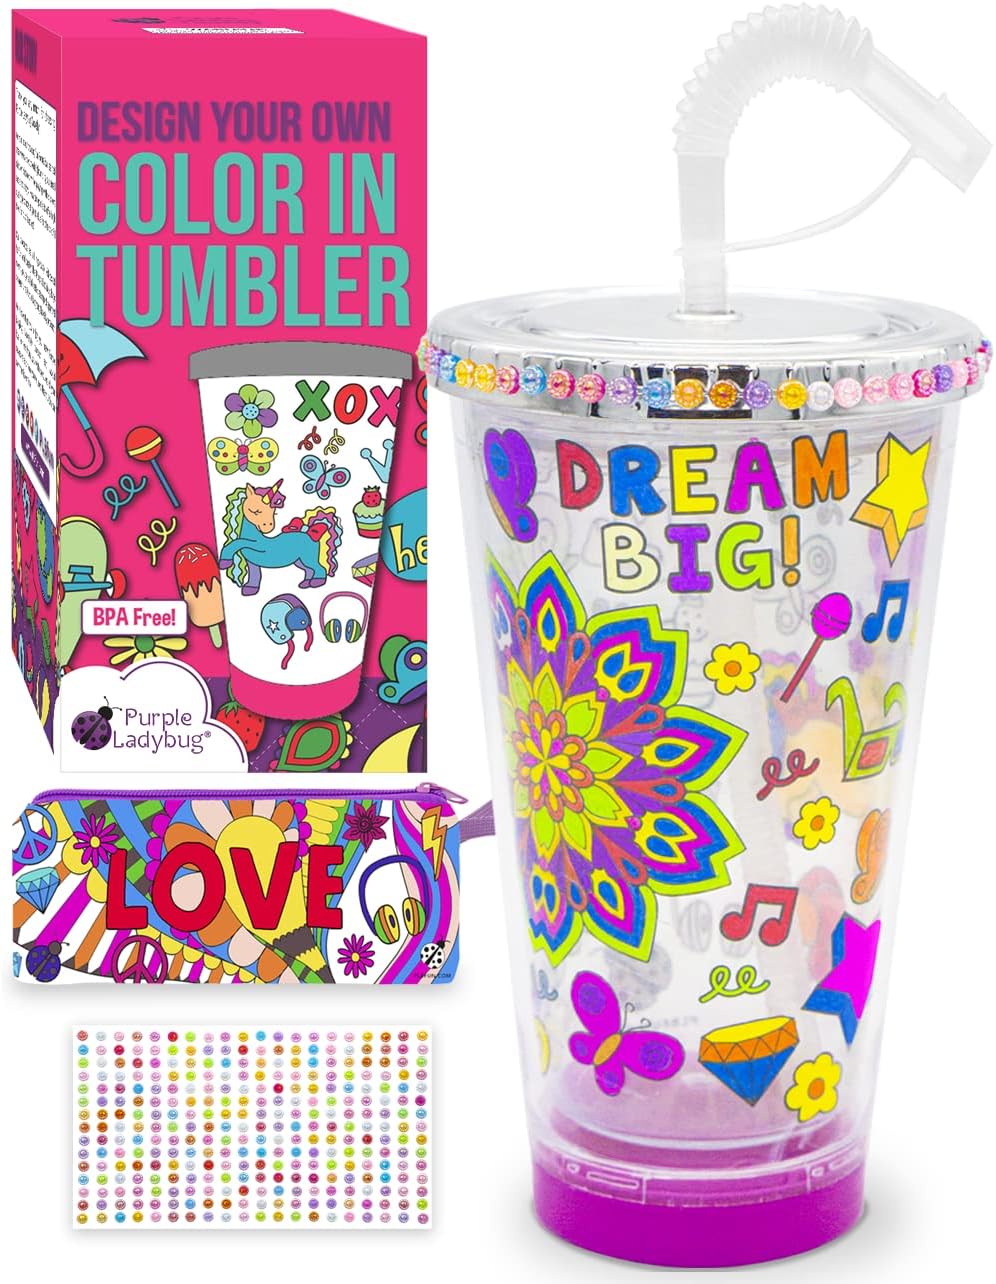 PURPLE LADYBUG Decorate Your Own Colour-in Tumbler RRP 8.99 CLEARANCE XL 6.99